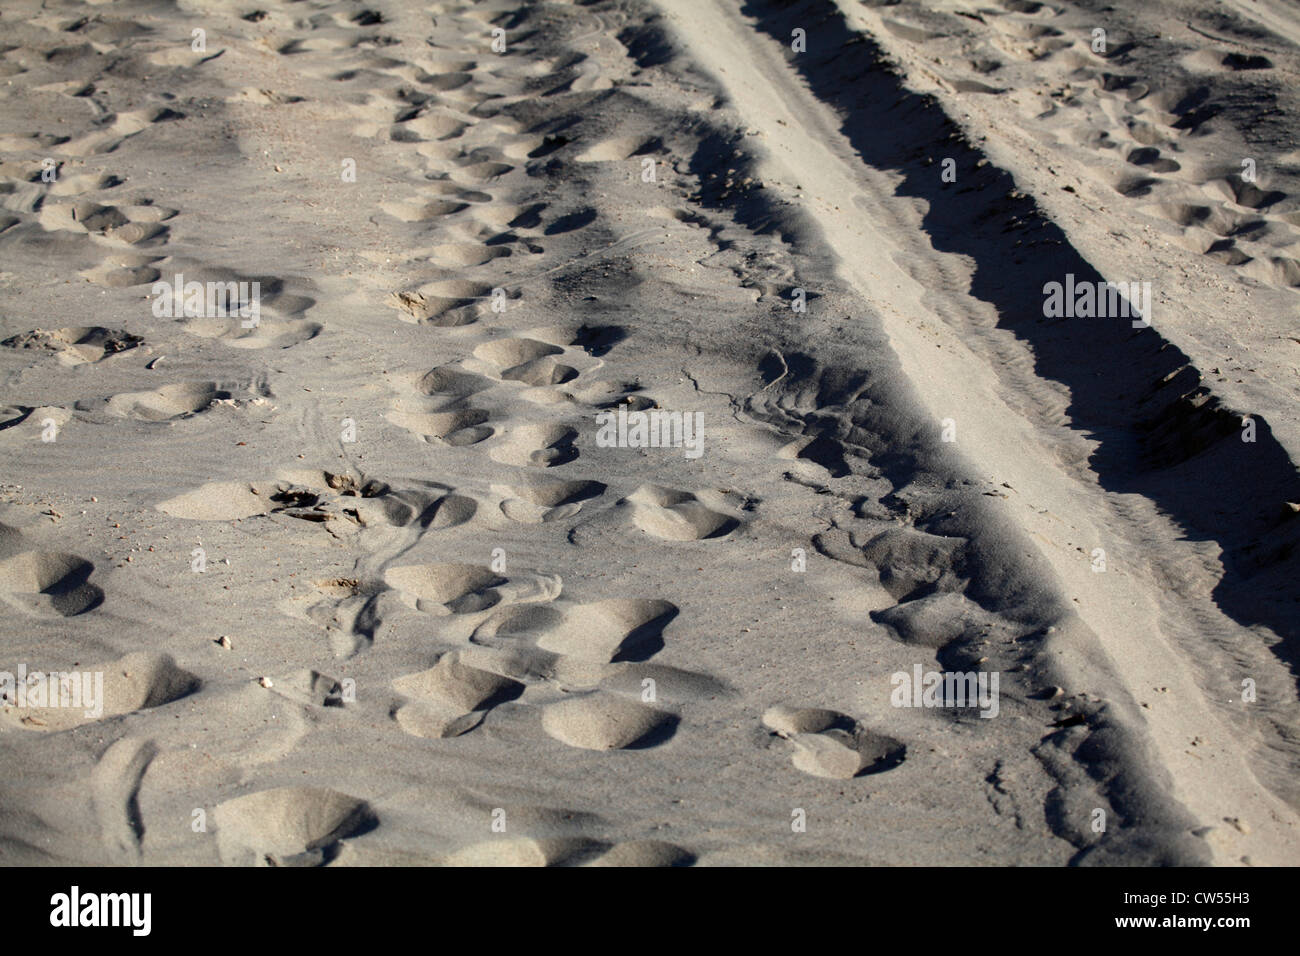 Footprints and tire tracks in sand. Stock Photo